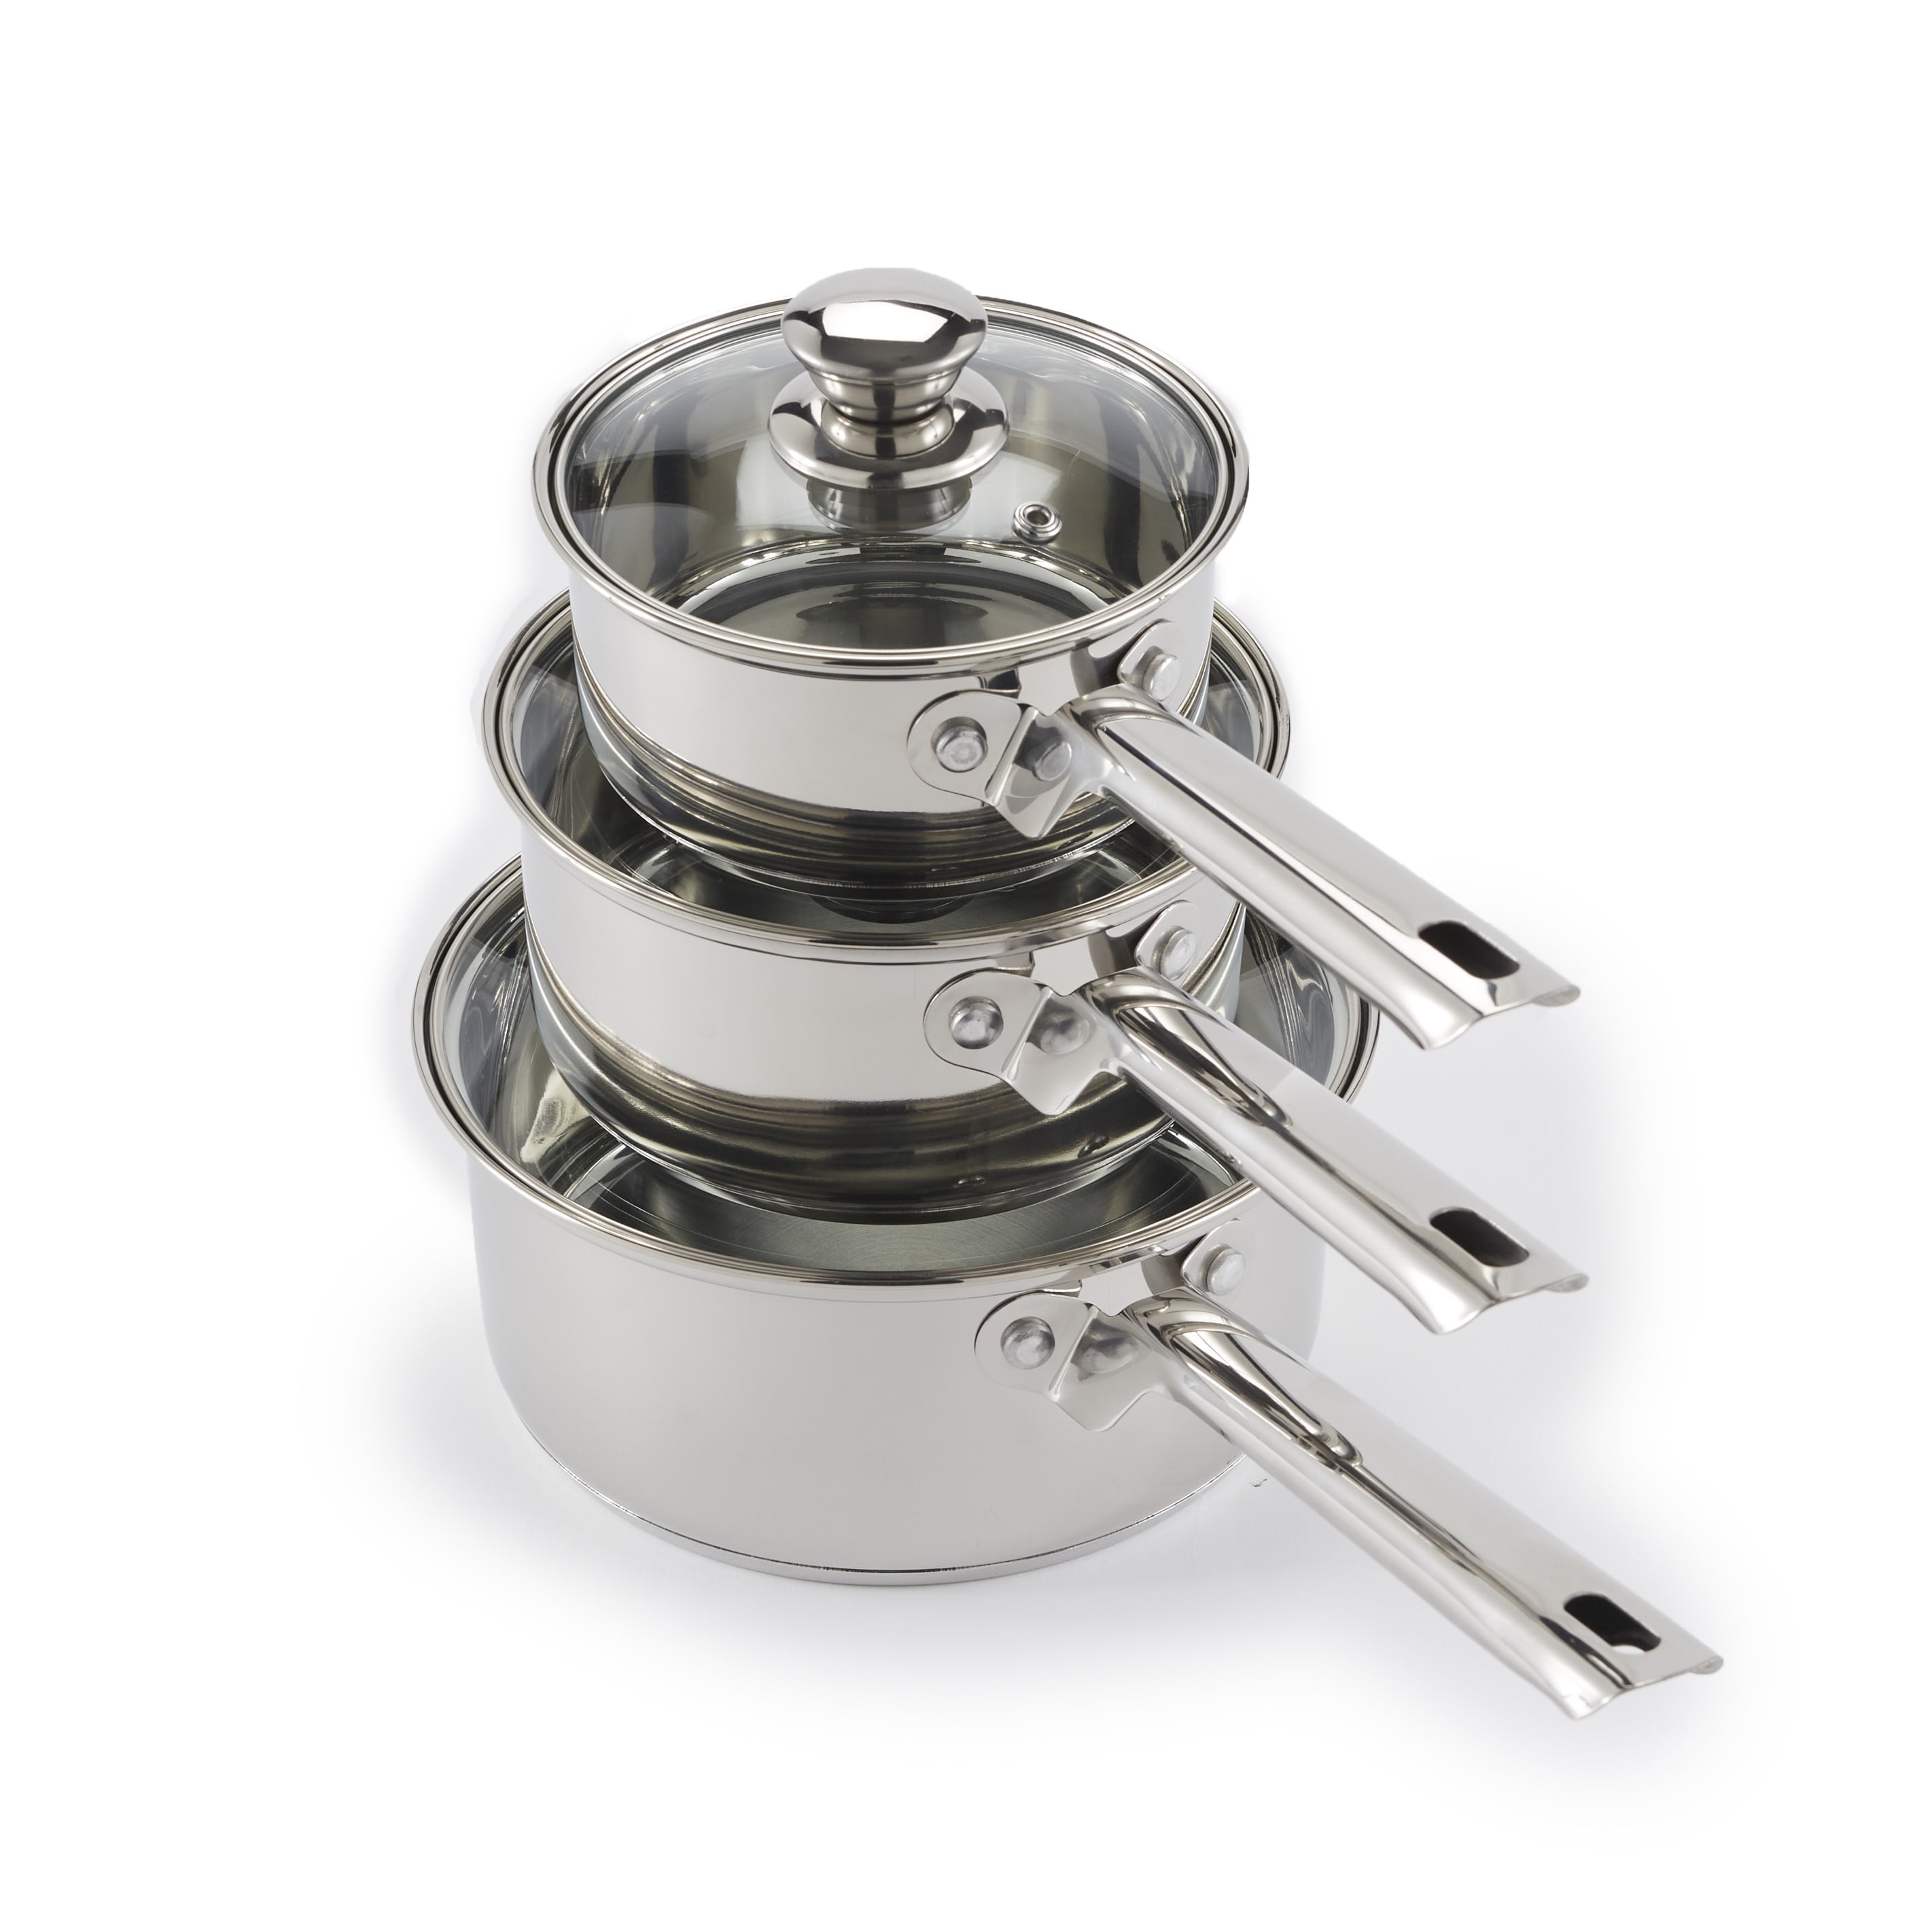 Sauce Pan Set - Stainless Steel Kitchen Cookware with Lids - Set of 3 